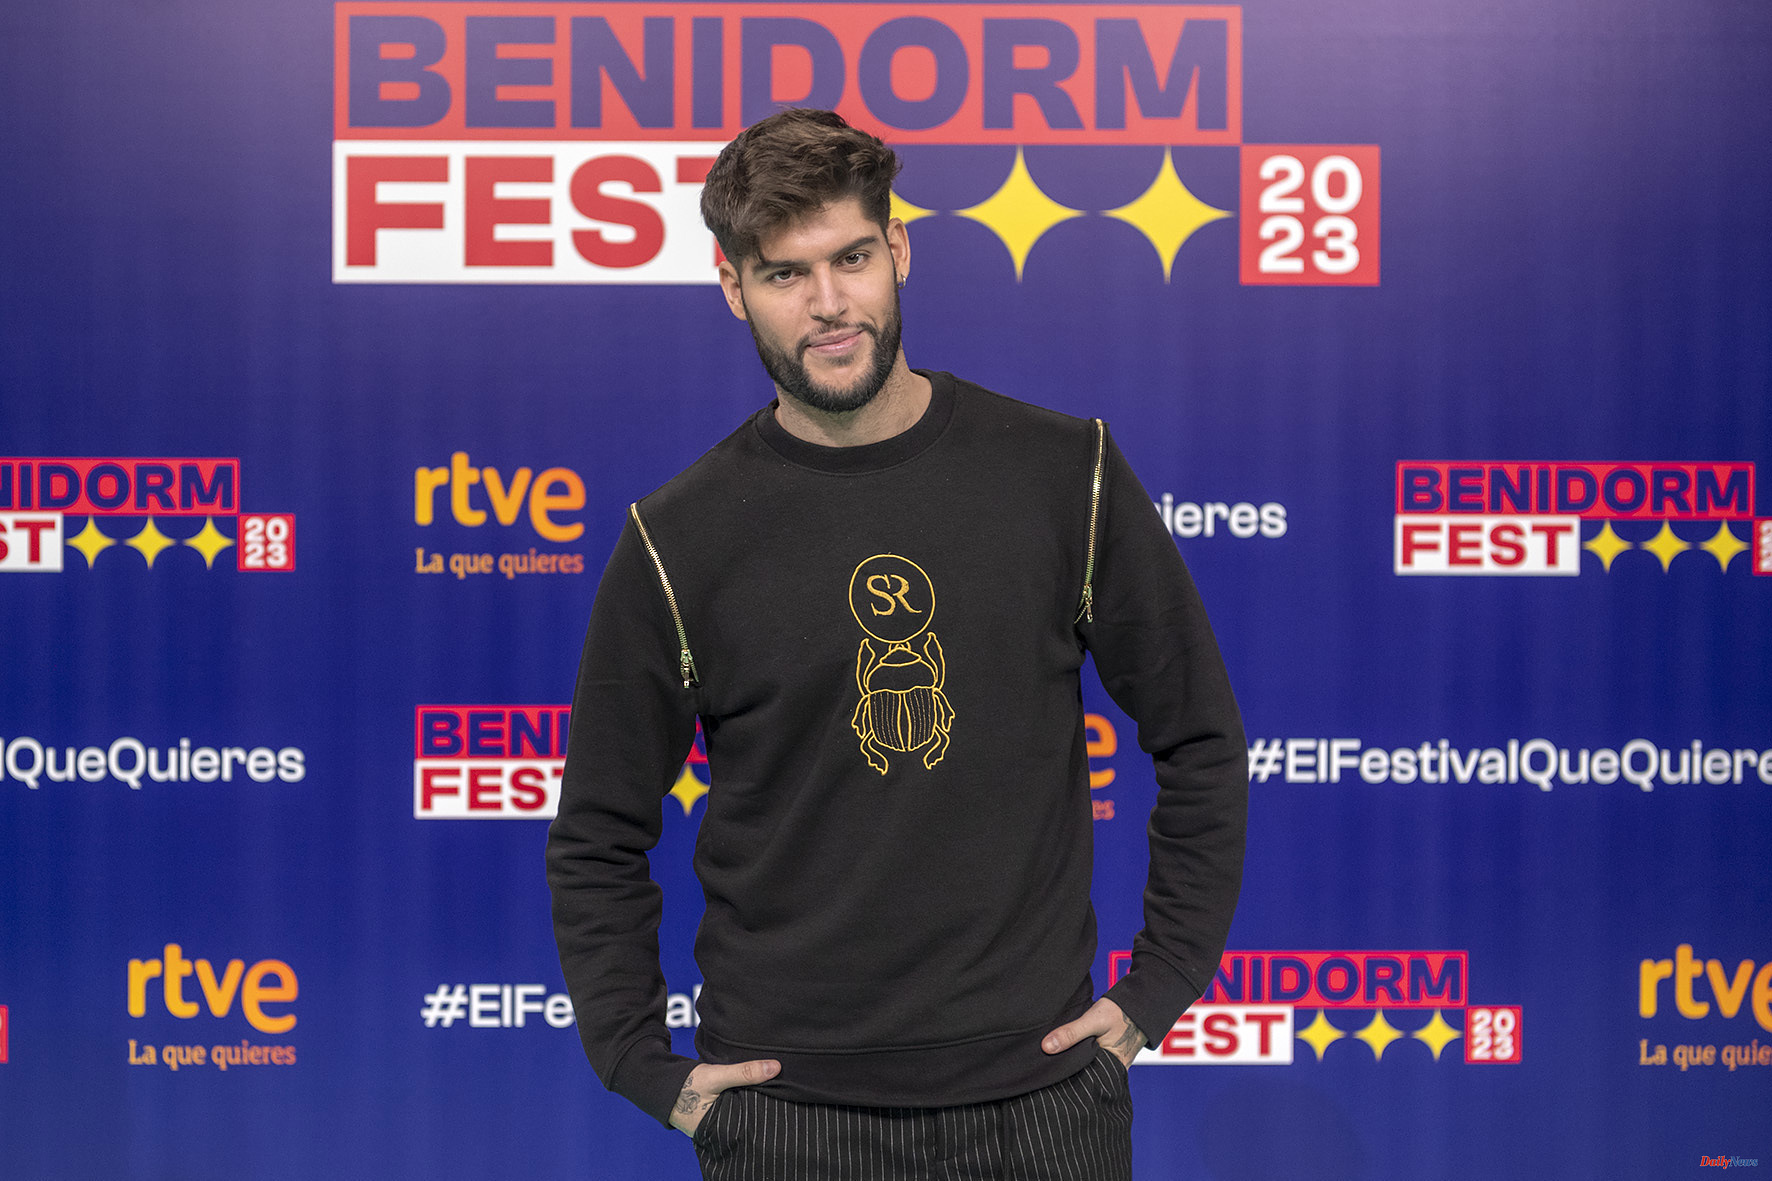 Benidorm Fest 2023 Benidorm Fest 2023 reveals the order of performances in the second semifinal: Famous will open and Vicco will close